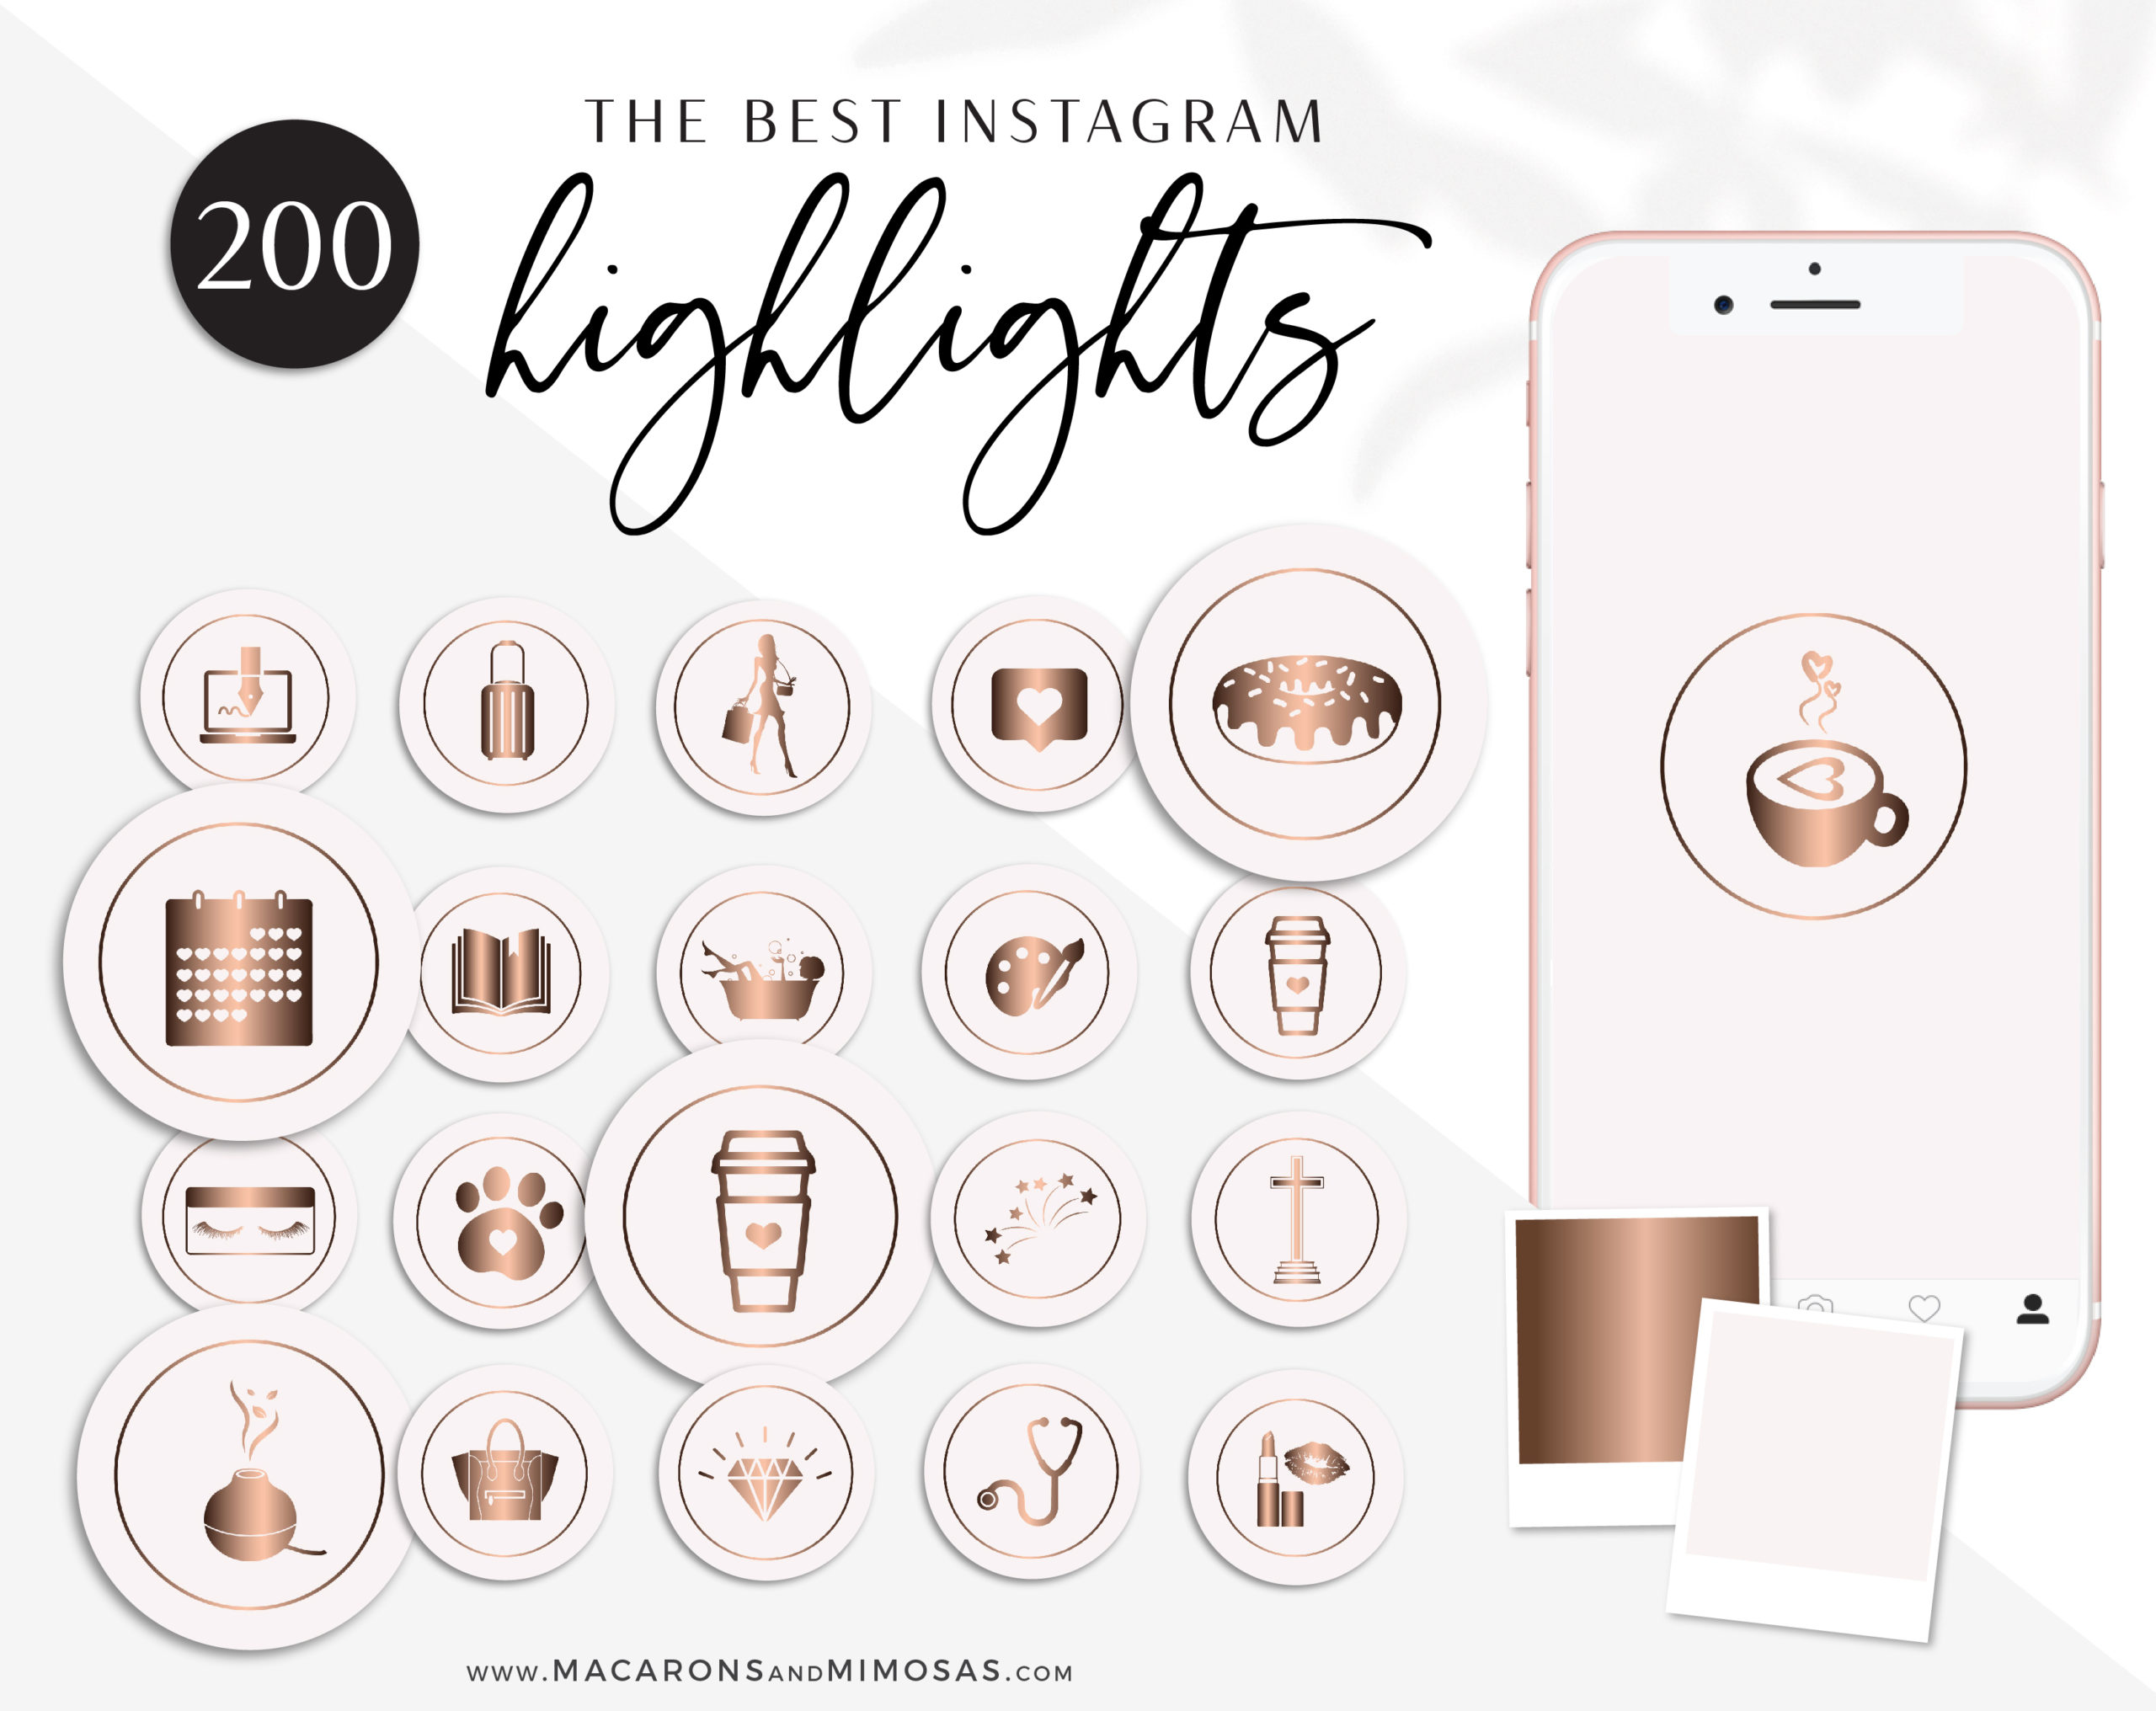 Rose Gold Pink Instagram Highlight Covers, Blush Pink Highlight Icons, Rose gold Instagram Covers, Gold Glitter and Blush Pink IG covers